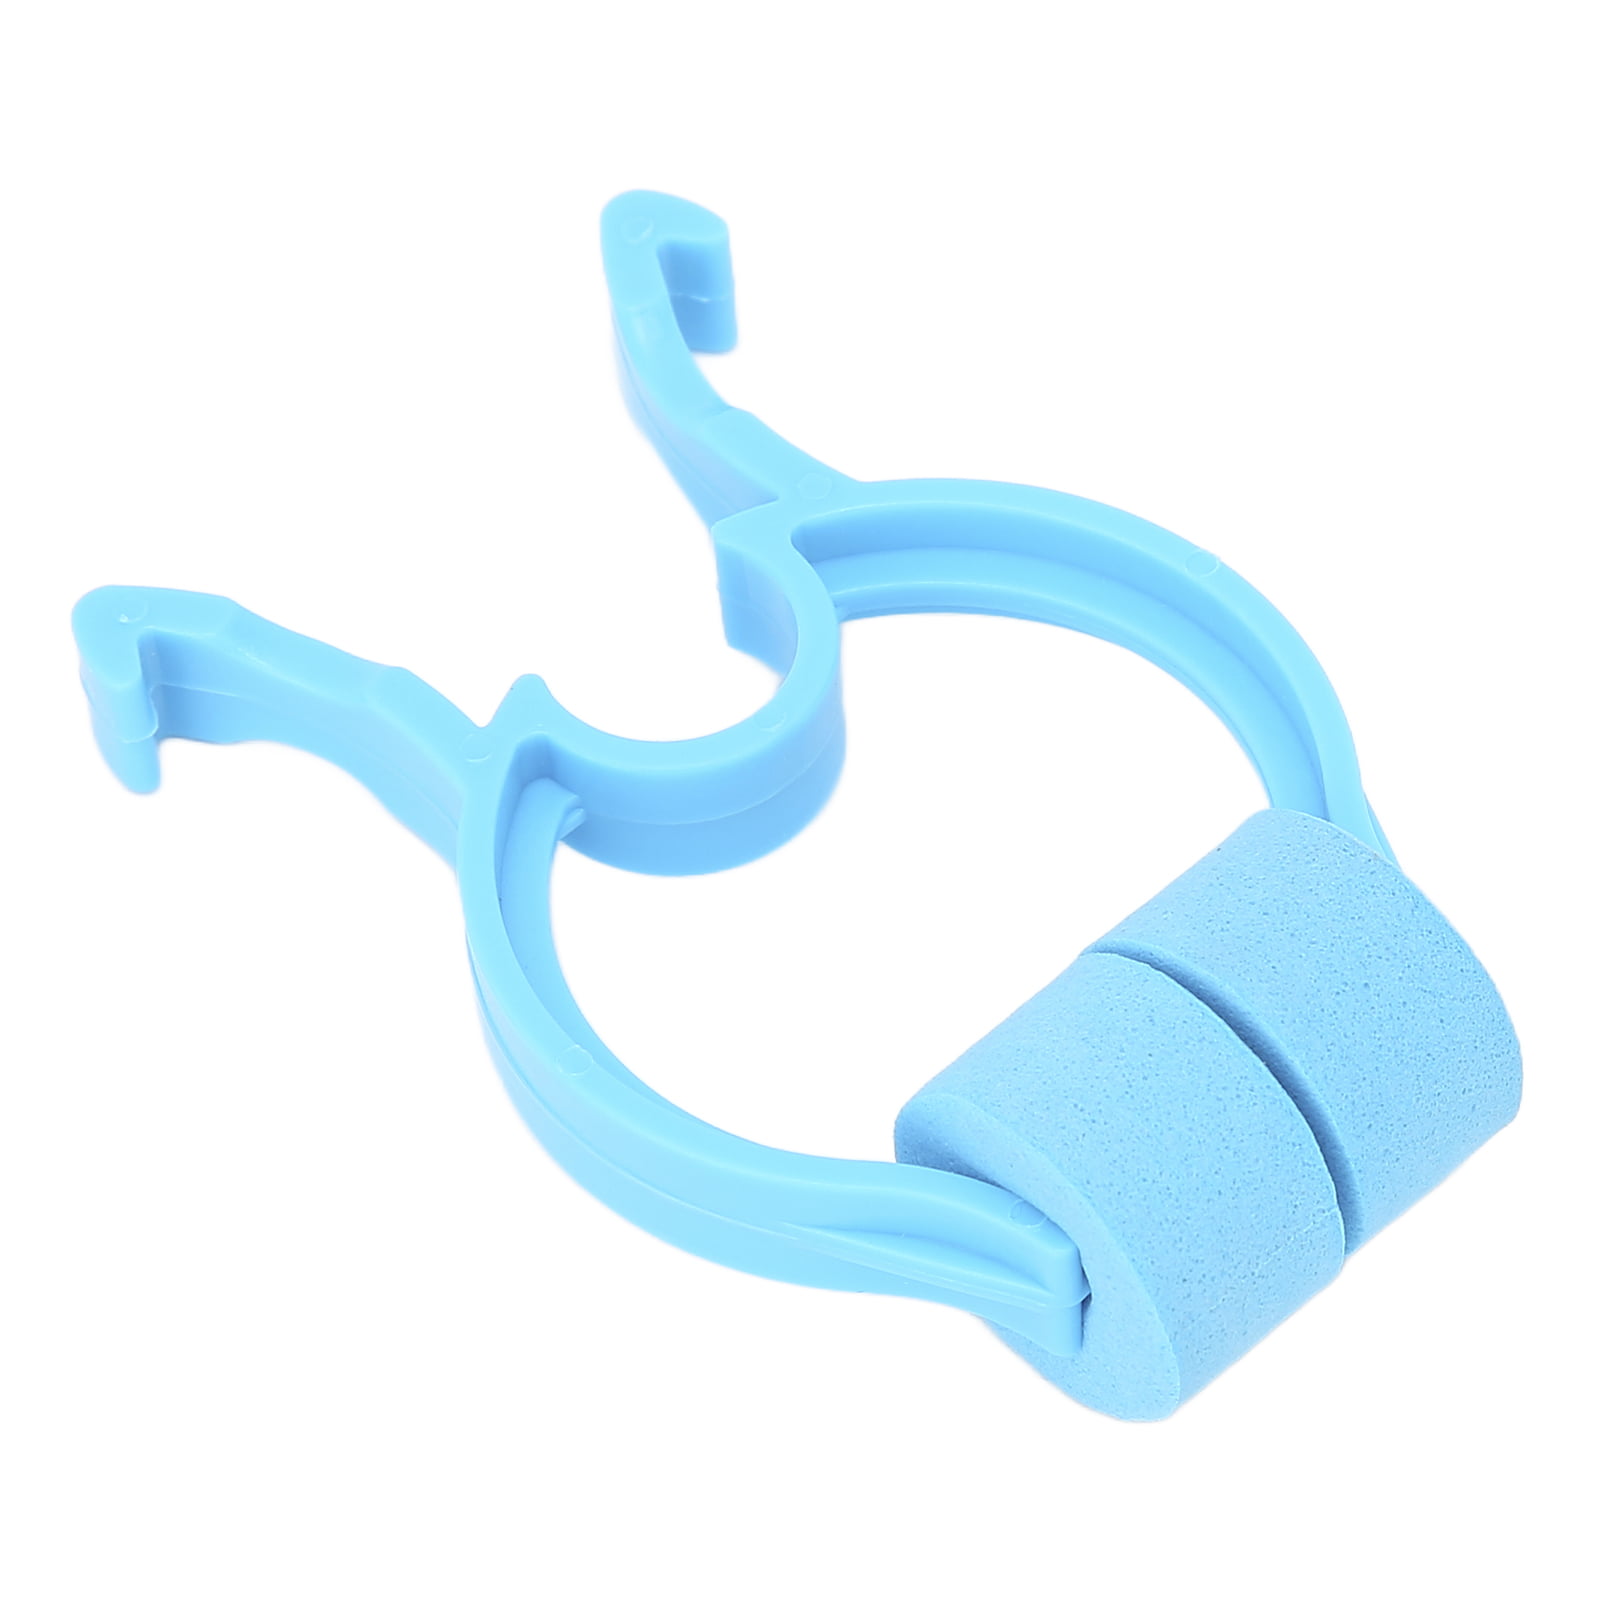 Zyyini Disposable Nose Clips,Nasal Clips Pulmonary Function Test ...